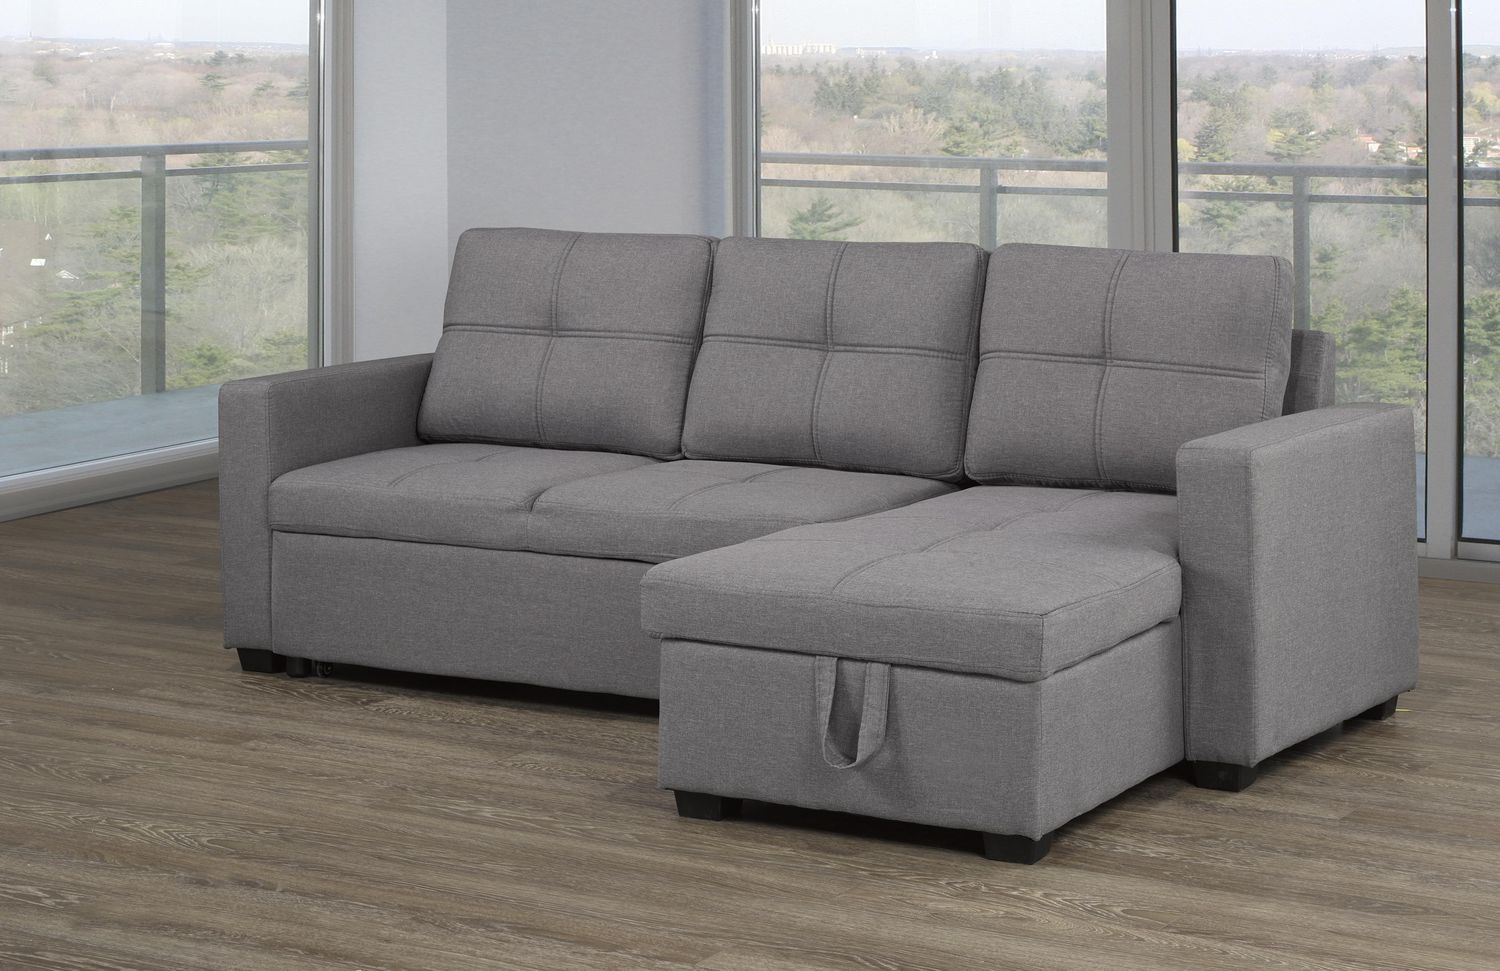 Sectional With Pull Out Bed & Storage Chaise, Grey | Walmart Canada Regarding 2 In 1 Gray Pull Out Sofa Beds (View 20 of 20)